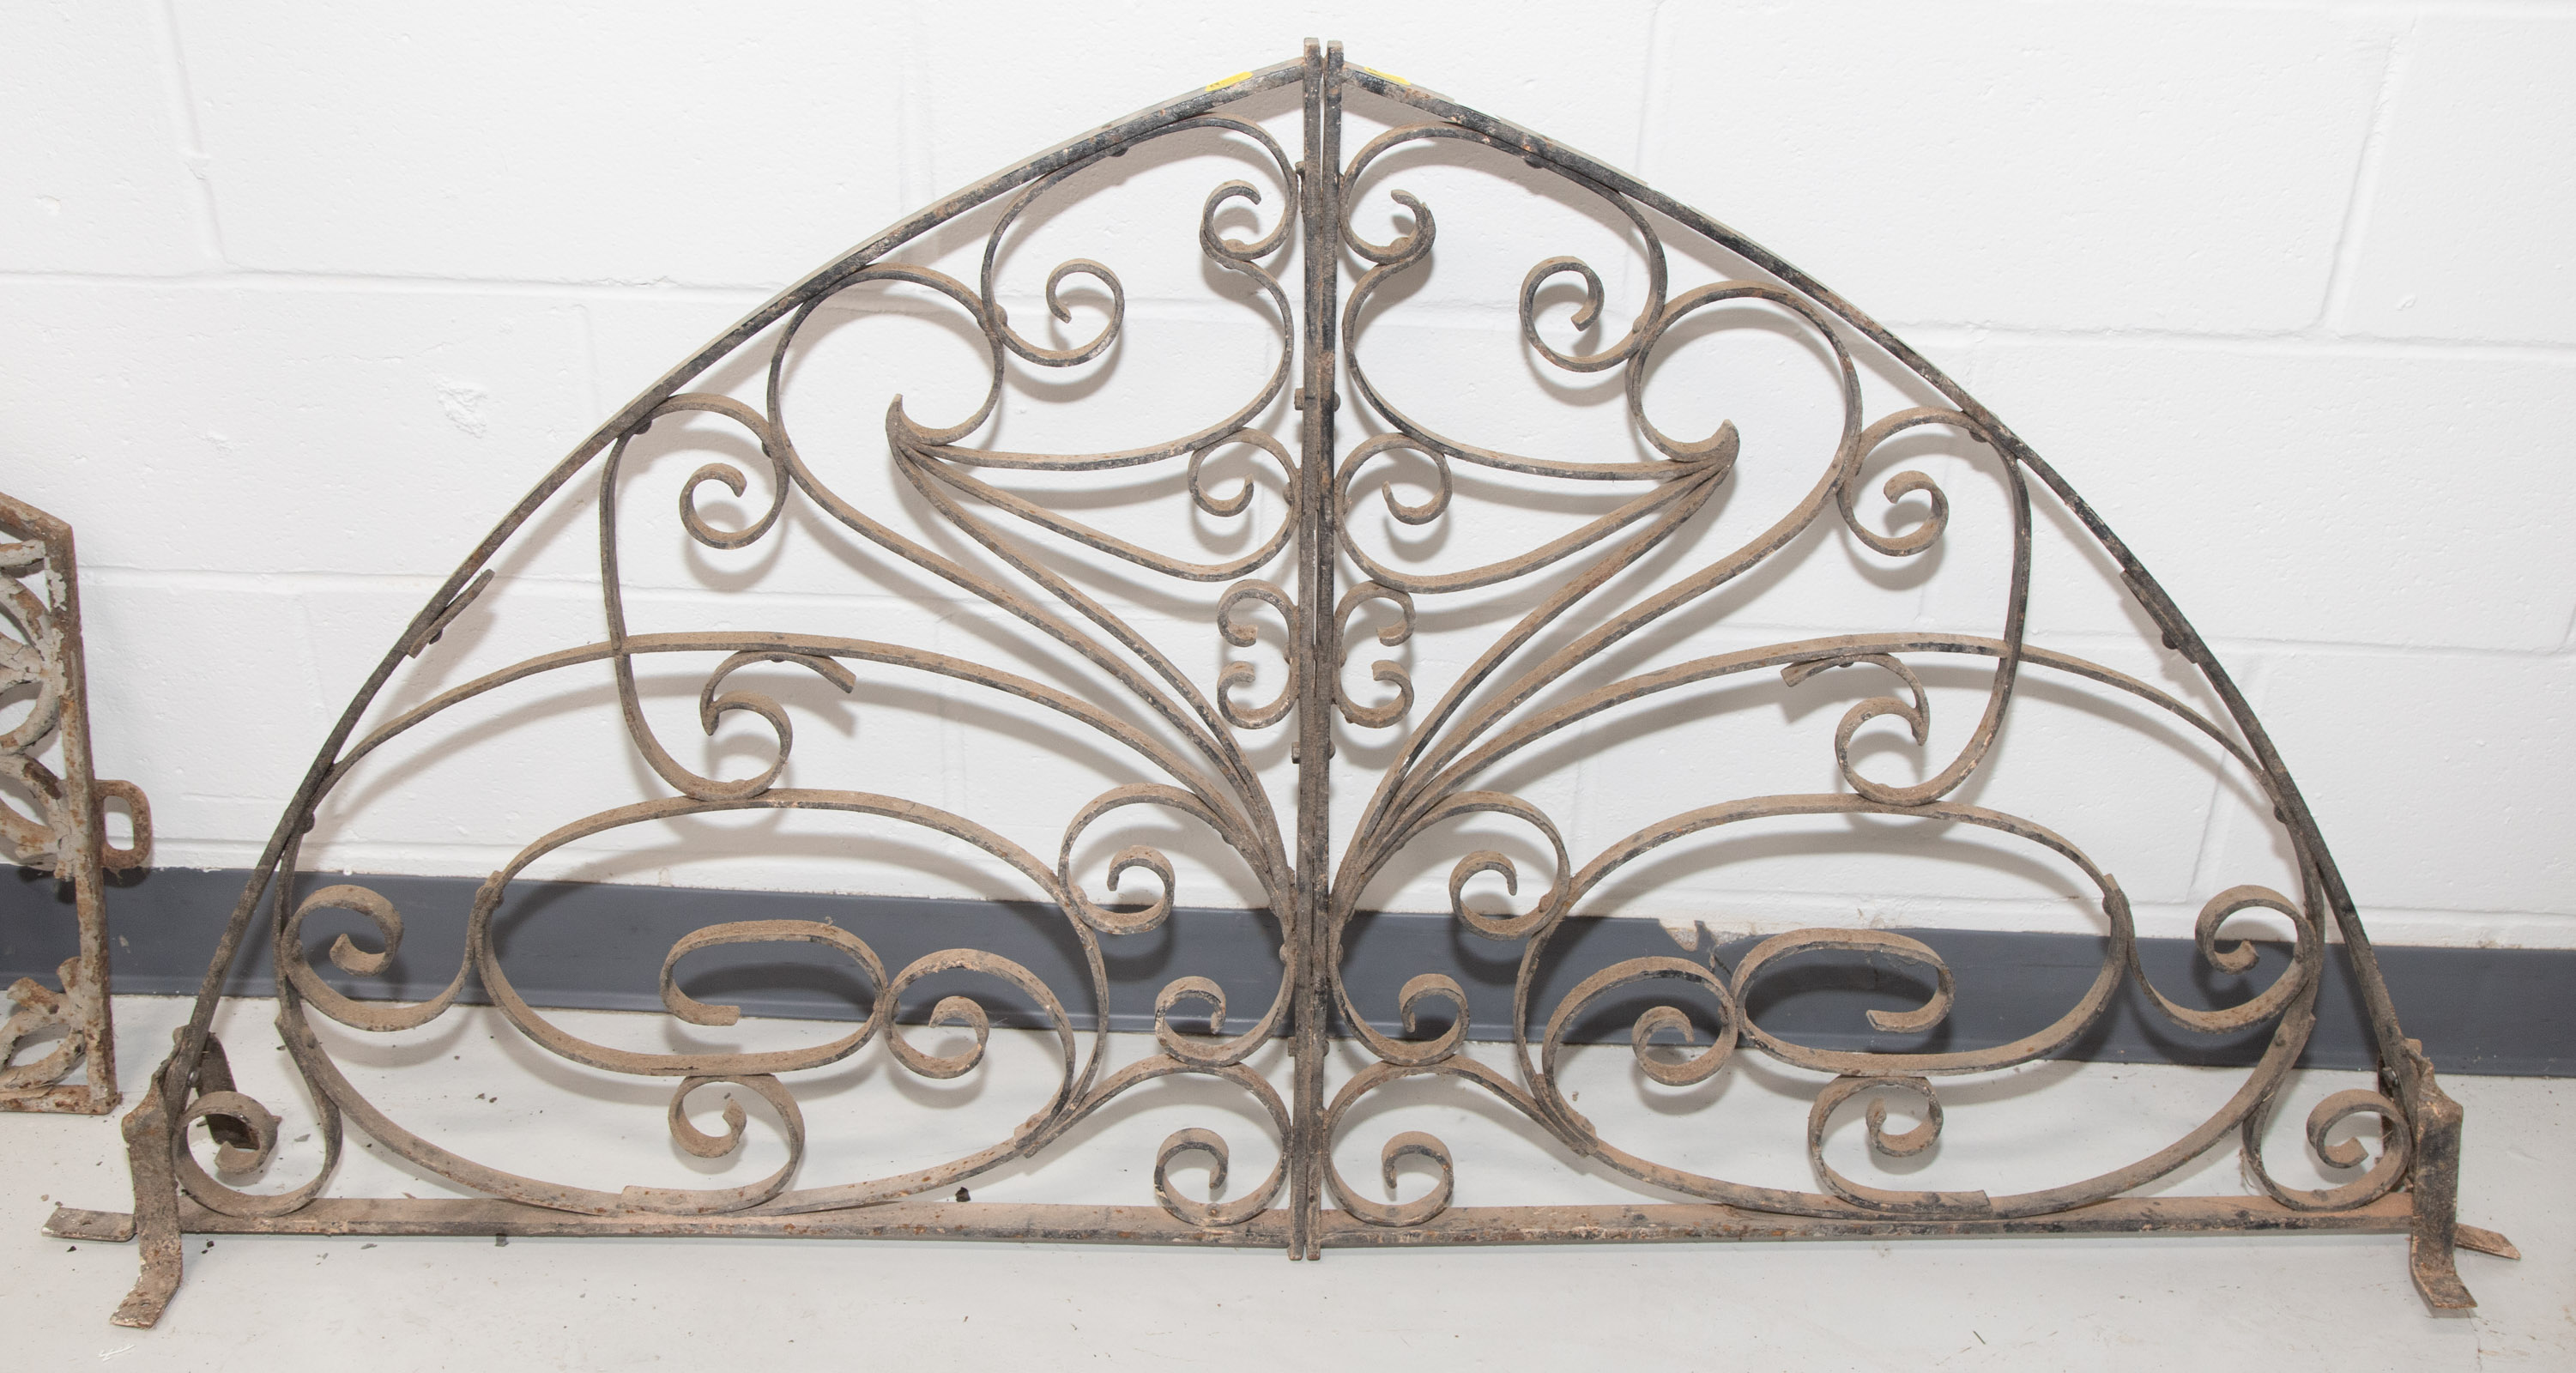 GOTHIC STYLE WROUGHT IRON ARCHITECTURAL 338a6b